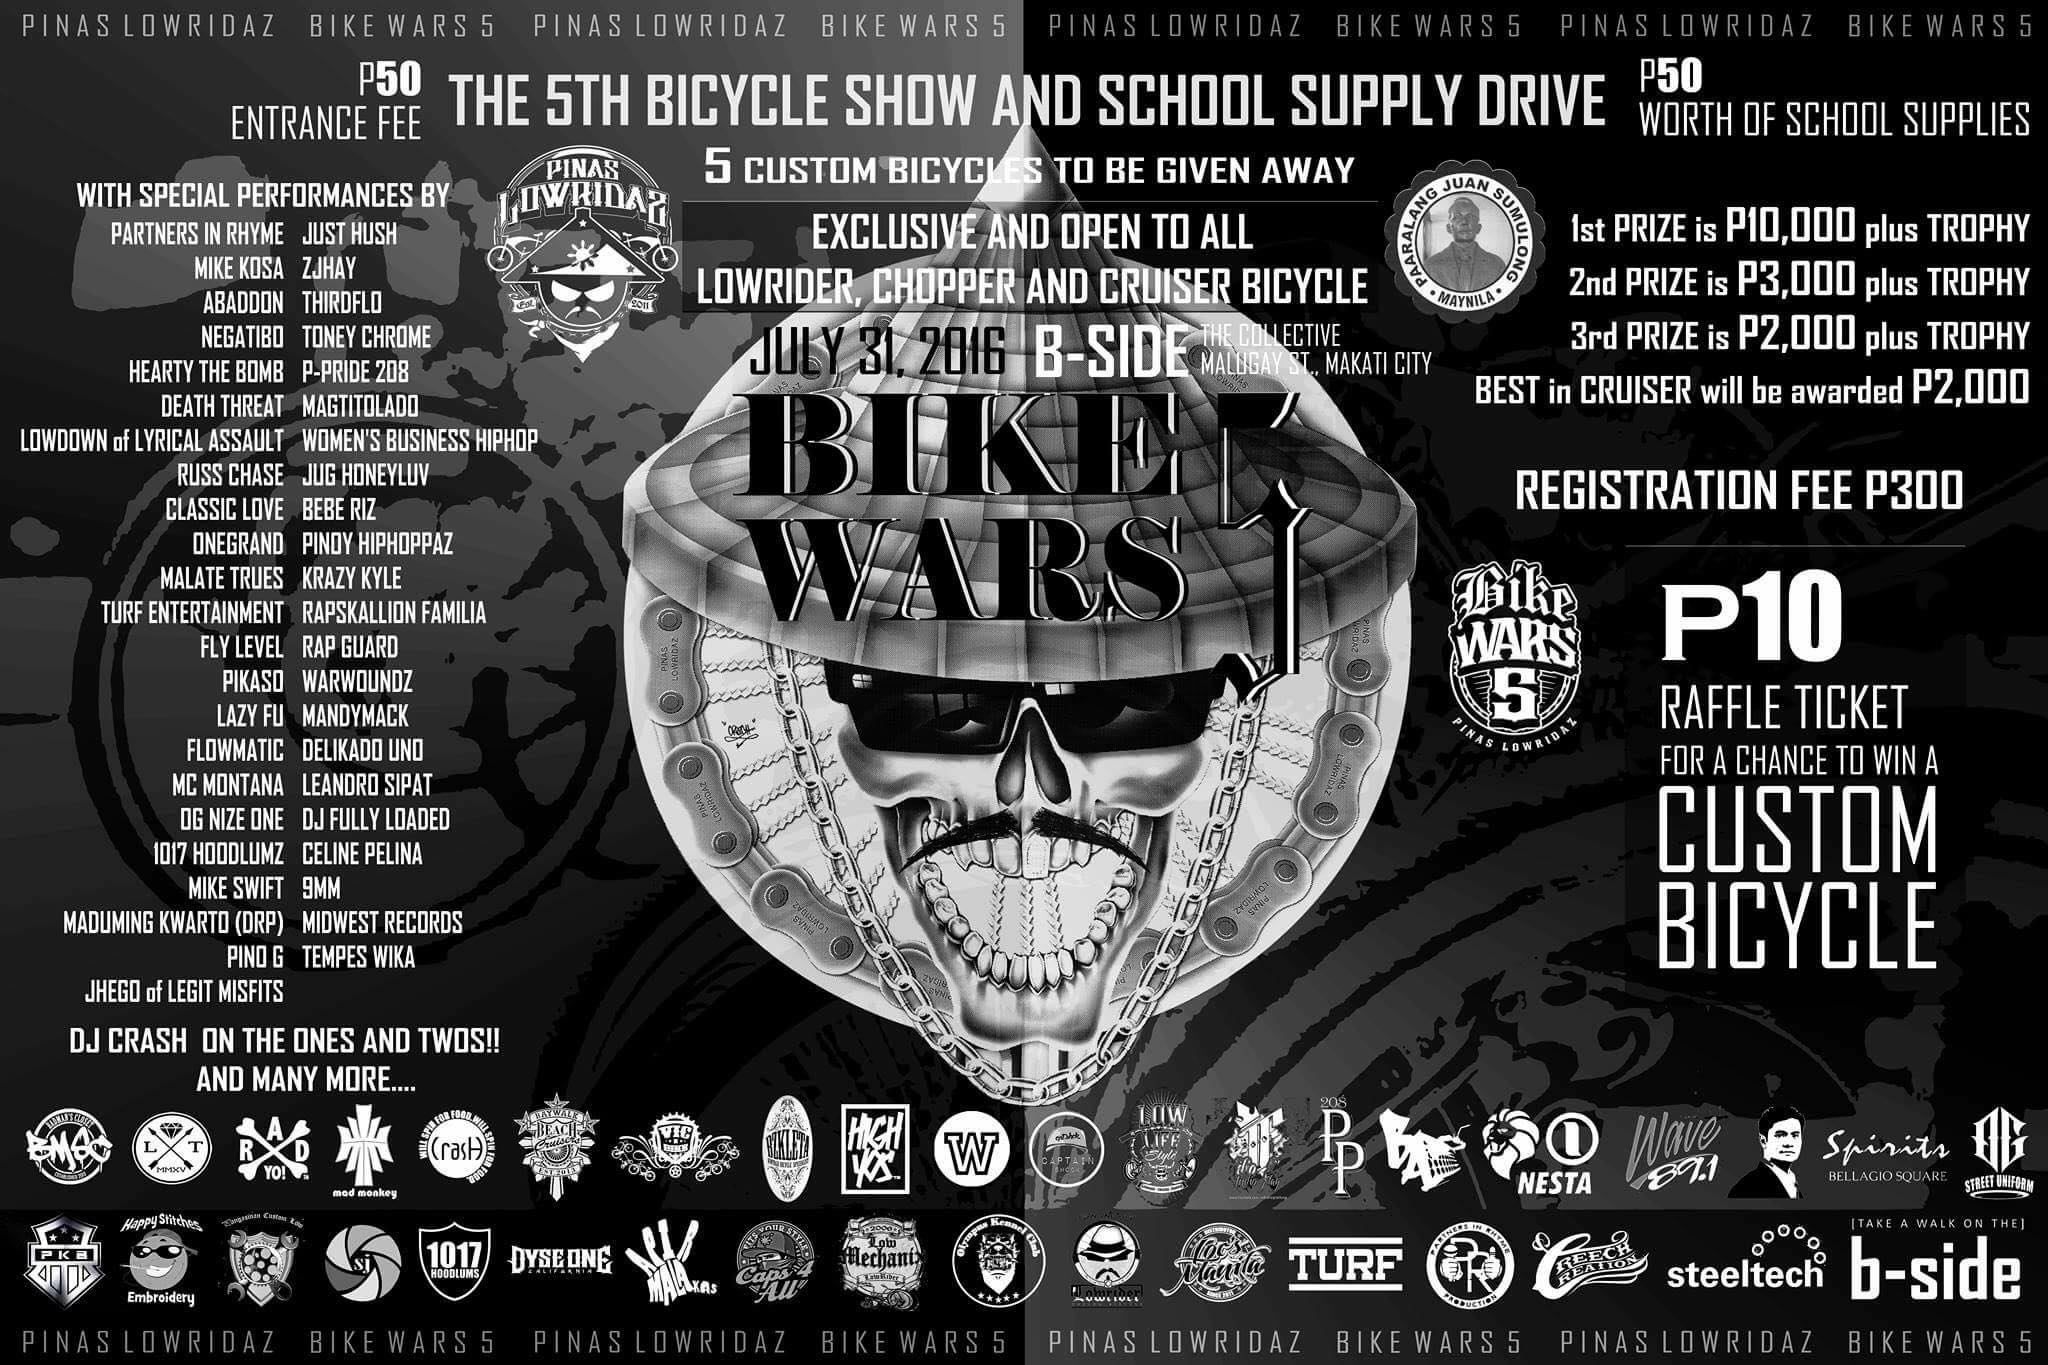 Bike Wars 5 clock July 31, 2016, Sunday at 6 AM Starts within an hour · 82° Cloudy pin Show Map B - SIDE 7274 Malugay St., San Antonio Village, Makati, Philippines About Discussion Write Post Add Photo / Video Create Poll Details PINAS LOWRIDAZ BC presents you BIKEWARS 5.. welcome to the event page of bikewars5. this year we will be helping out the kinder to grade 6 students of JUAN SUMULONG ELEMENTARY SCHOOL, MANILA. BIKEWARS 5 will be held at the B-Side malugay street Makati on July 31st, Sunday, 2016 7:00am to 7:00pm etrance fee will be P50.00 cash or P50.00 worth of school supplies and all money that Bikewars5 gets will be going to JUAN SUMULONG ELEMENTARY SCHOOL, MANILA students. we will be giving away five (5) custom lowrider chopper bicycles for the grand priize of our raffle draw. yes five bikes. this was made possible by our friends from the custom cycles industry. 1 bike from LOWLIFESTYLE BC 1 bike from SAN ANDRES LOWRIDER 1 bike from BZKLETA CLASSIC BIKES 1 bike from PANGASINAN CUSTOM LOW 1 bike from LOW MECHANIX raffle tickets will be sold for only P10.00 each. pls contact your local pinas lowridaz member. and as always, the bikewars5 stage will be graced by our friends from the music industry such as: (in no particular order) PARTNERS IN RHYME MIKE KOSA ABADDON NEGATIBO HEARTY THE BOMB DEATH THREAT LOWDOWN of LYRICAL ASSAULT RUSS CHASE CLASSIC LOVE ONEGRAND MALATE TRUES TURF ENTERTAINMENT FLY LEVEL PIKASO LAZY FU FLOWMATIC MC MONTANA OG NIZE ONE 1017 HOODLUMZ MIKE SWIFT MADUMING KWARTO (DRP) PINO G JUST HUSH ZJHAY THIRDFLO TONEY CHROME P-PRIDE 208 MAGTITOLADO WOMEN'S BUSINESS HIPHOP JUG HONEYLUV BEBE RIZ PINOY HIPHOPPAZ KRAZY KYLE RAPSKALLION FAMILIA RAP GUARD WARWOUNDZ MANDYMACK DELIKADO UNO LEANDRO SIPAT DJ FULLY LOADED CELINE PELINA 9MM MIDWEST RECORDS TEMPES WIKA JHEGO OF LEGIT MISFITS KEMIKAL ALI OF BB-CLAN DJ CRASH ON THE ONES AND TWOS!! AND MANY MORE SURPRISE GUESTS...